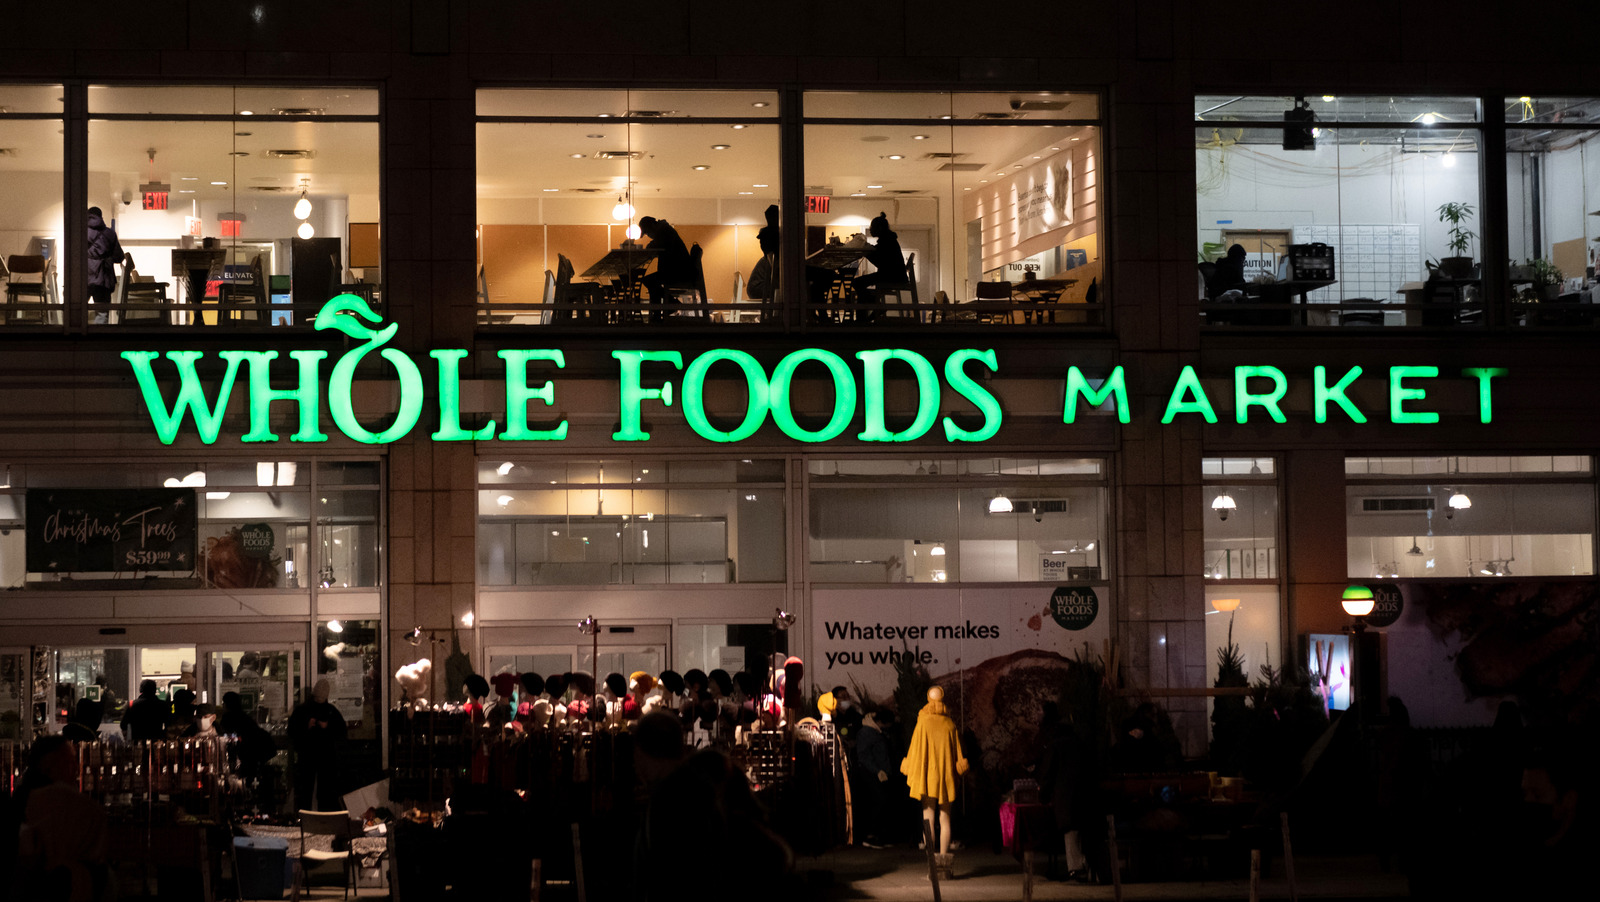 Whole Foods brings tasty variety to gourmet shopping